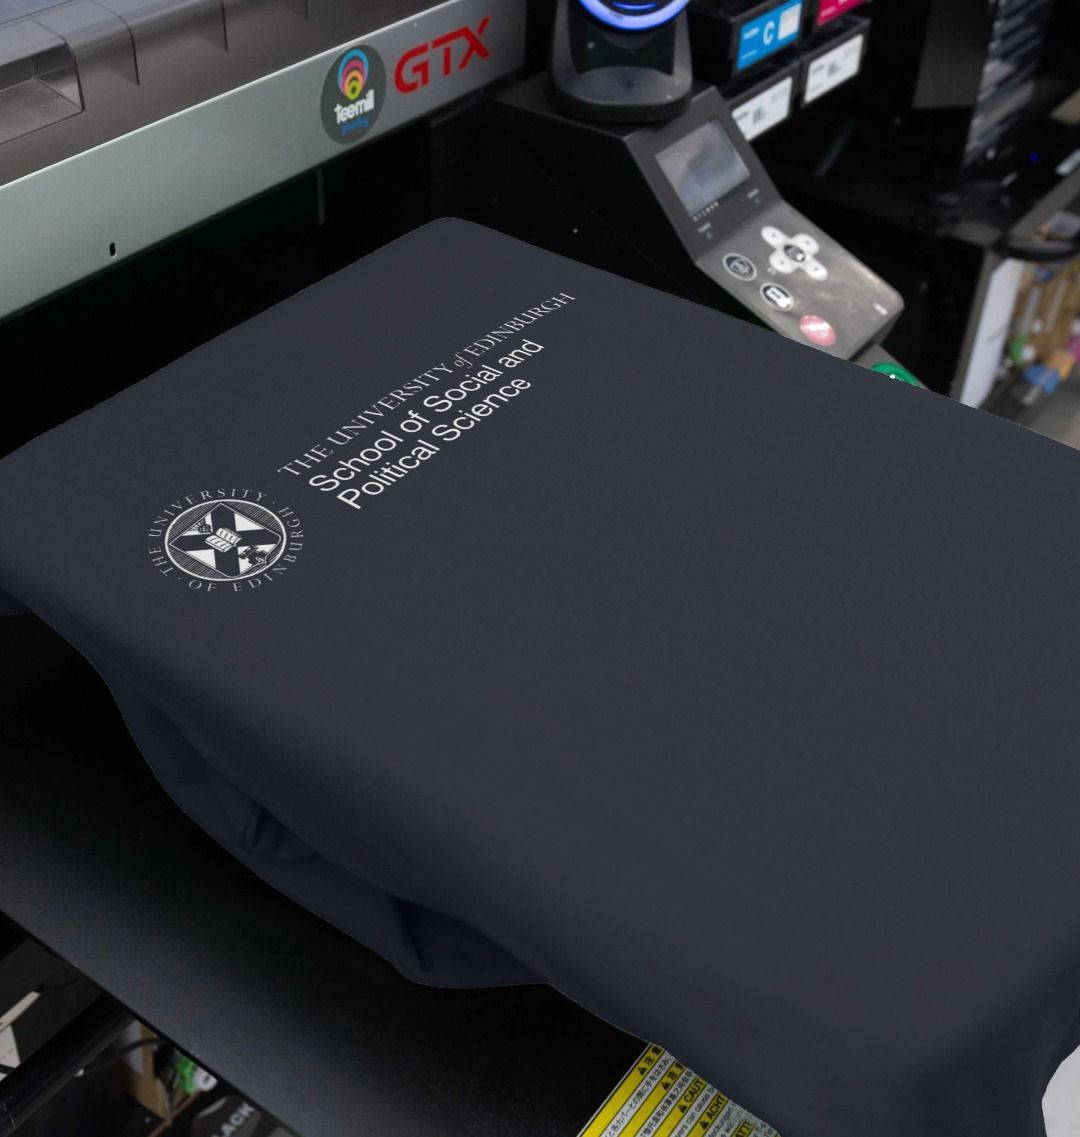 Our School of Social and Political Science Sweatshirt being printed by our print on demand partner, teemill.